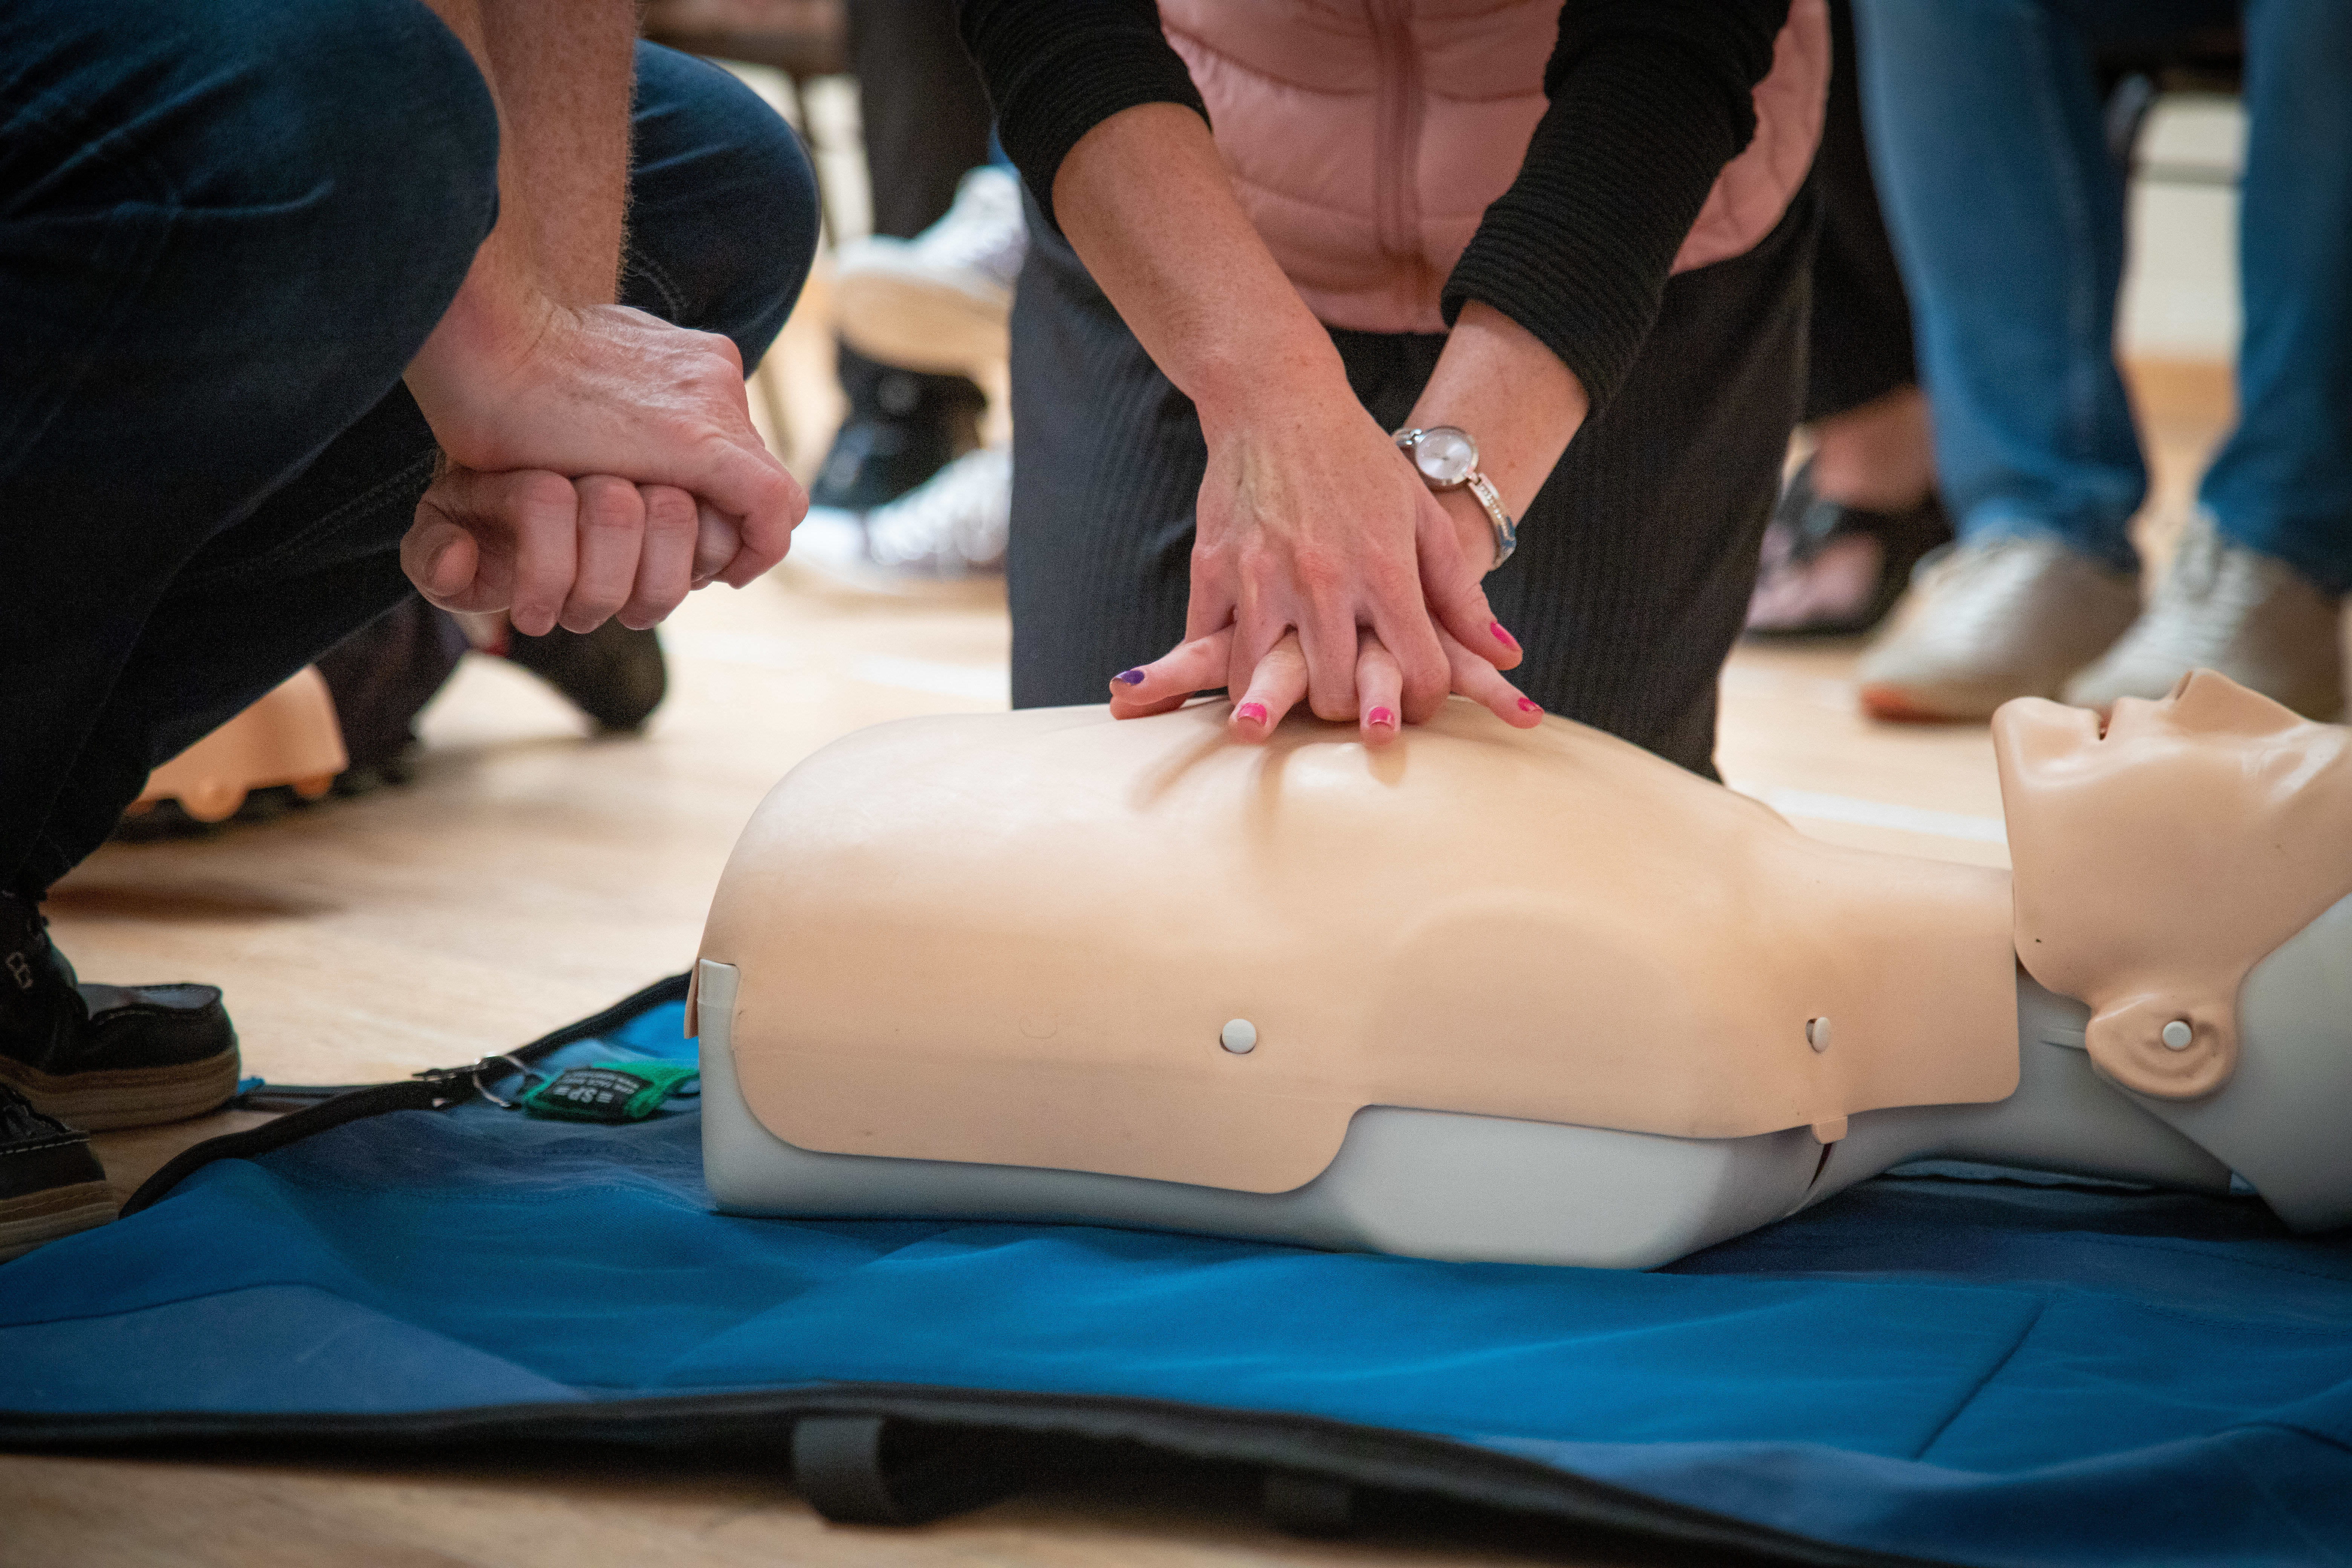 Learn life-saving CPR for free in every county this February